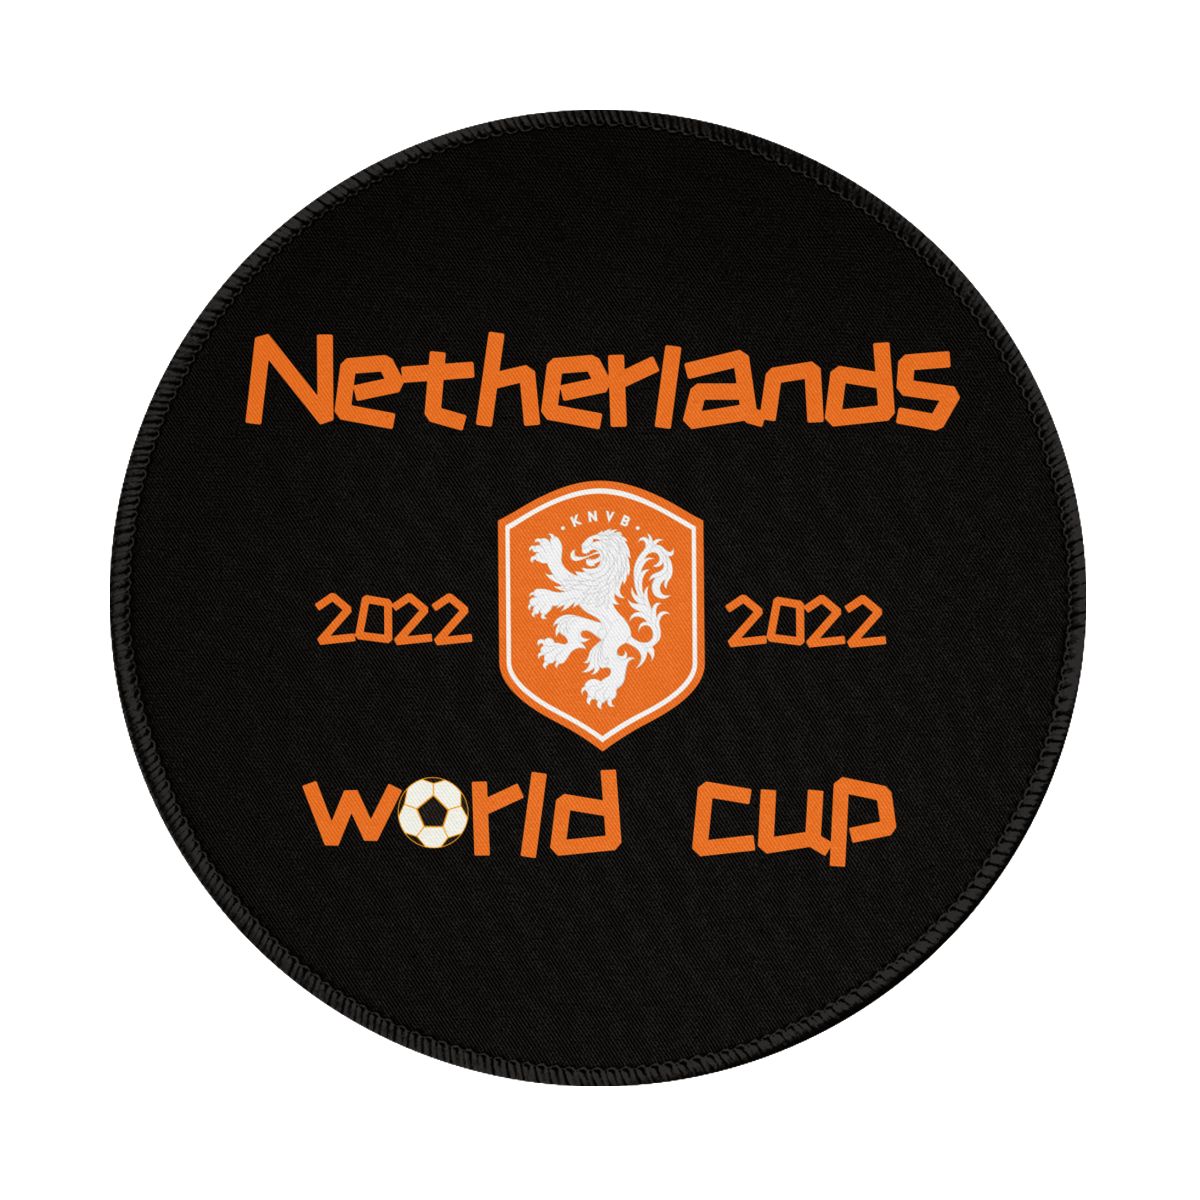 Netherlands 2022 World Cup Team Logo Non-Slip Rubber Round Mouse Pad